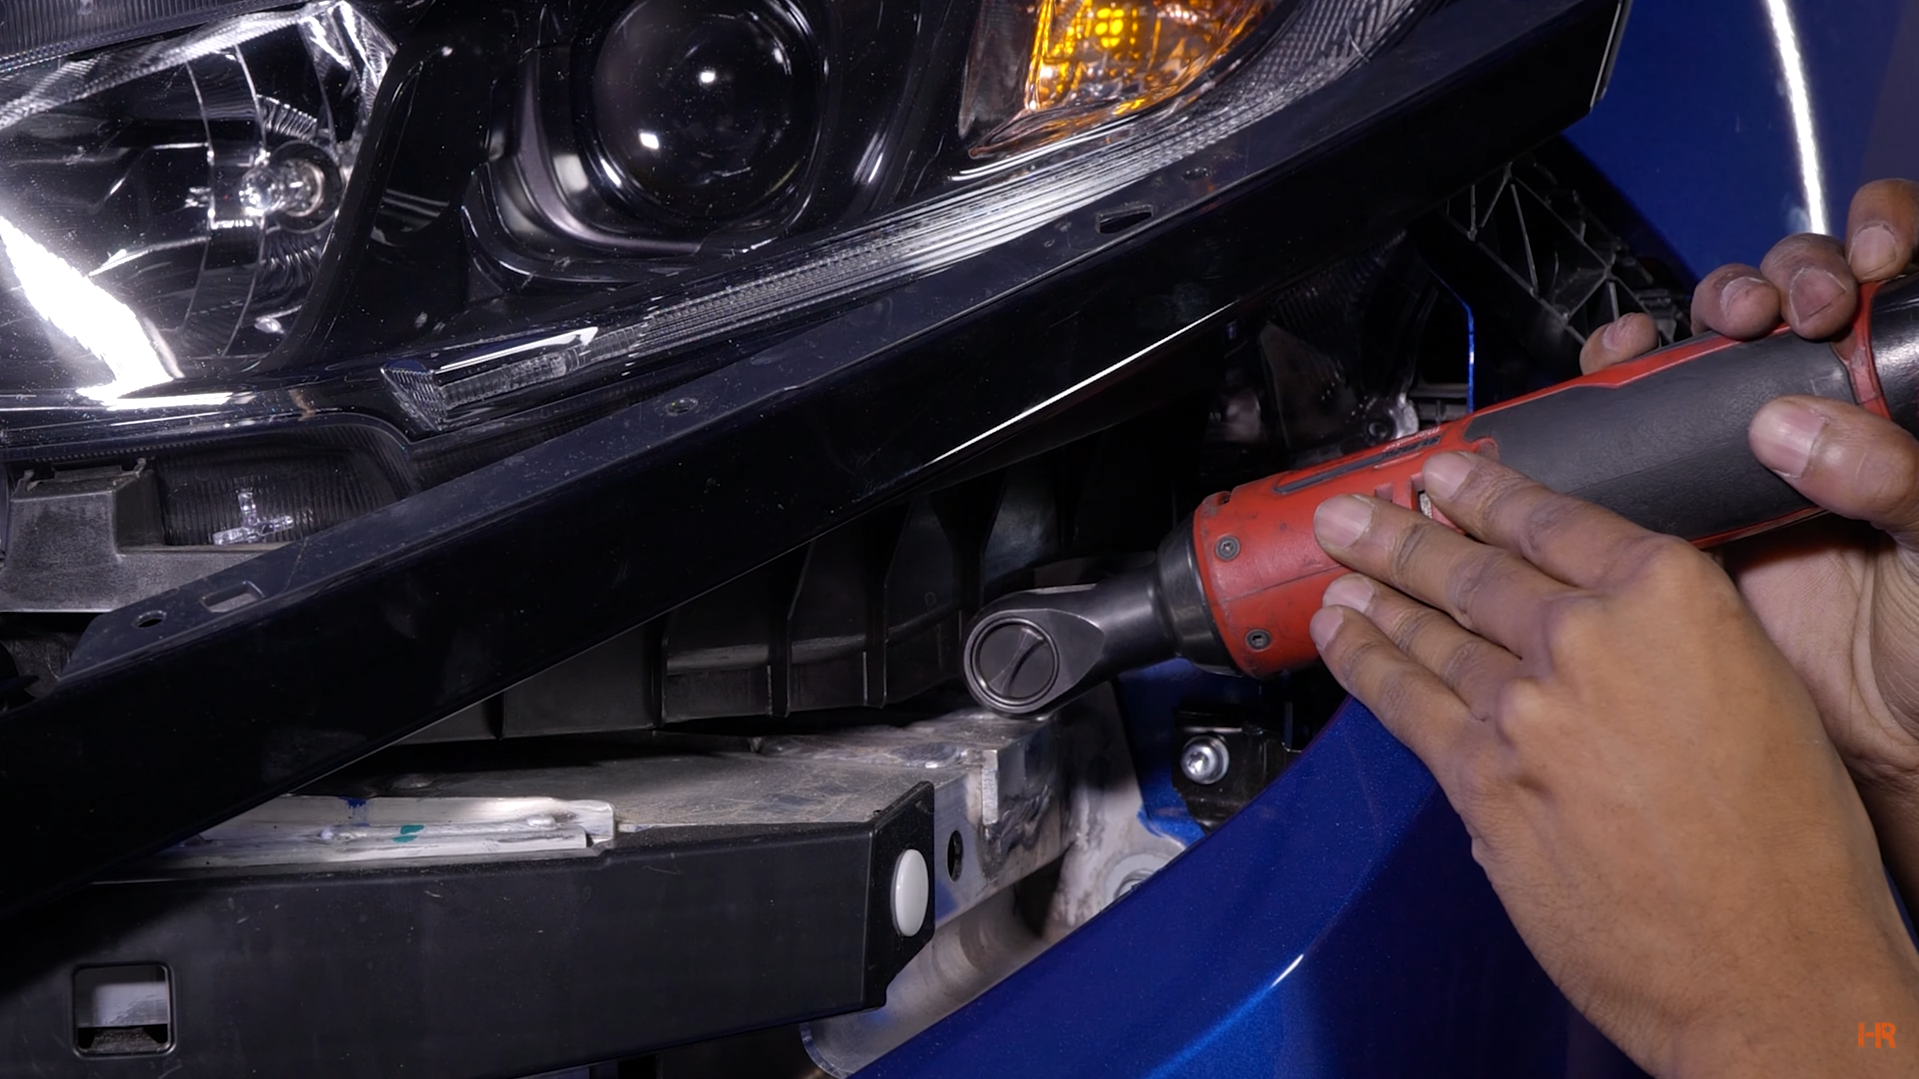 A 10mm bolt is removed from a Honda Civic headlight.